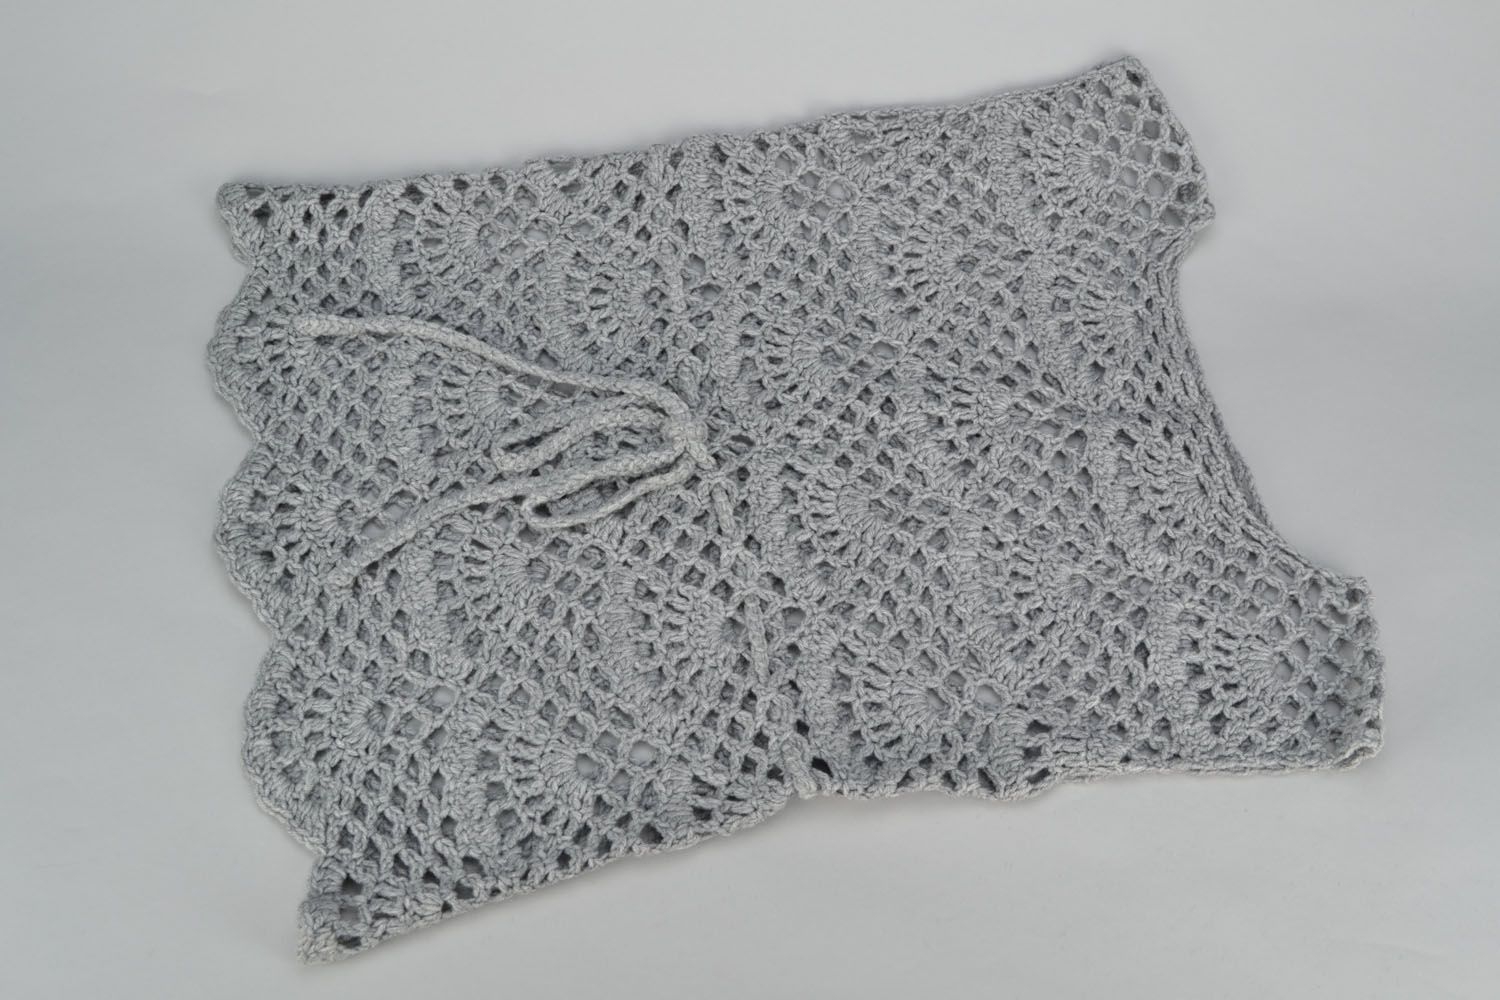 Crocheted lacy vest photo 2